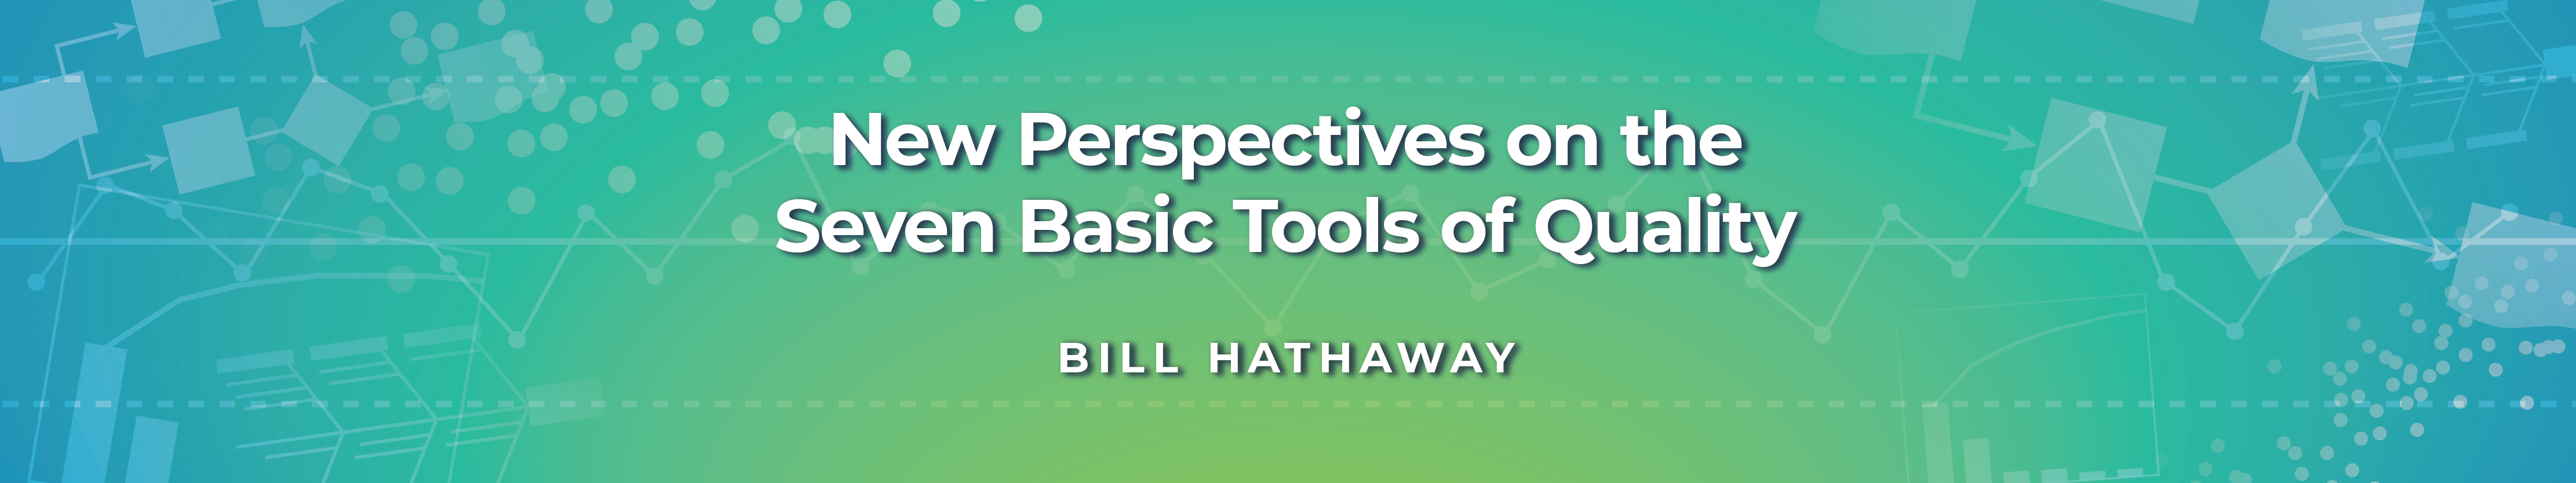 New Perspectives on the Seven Basic Tools of Quality Bill Hathaway